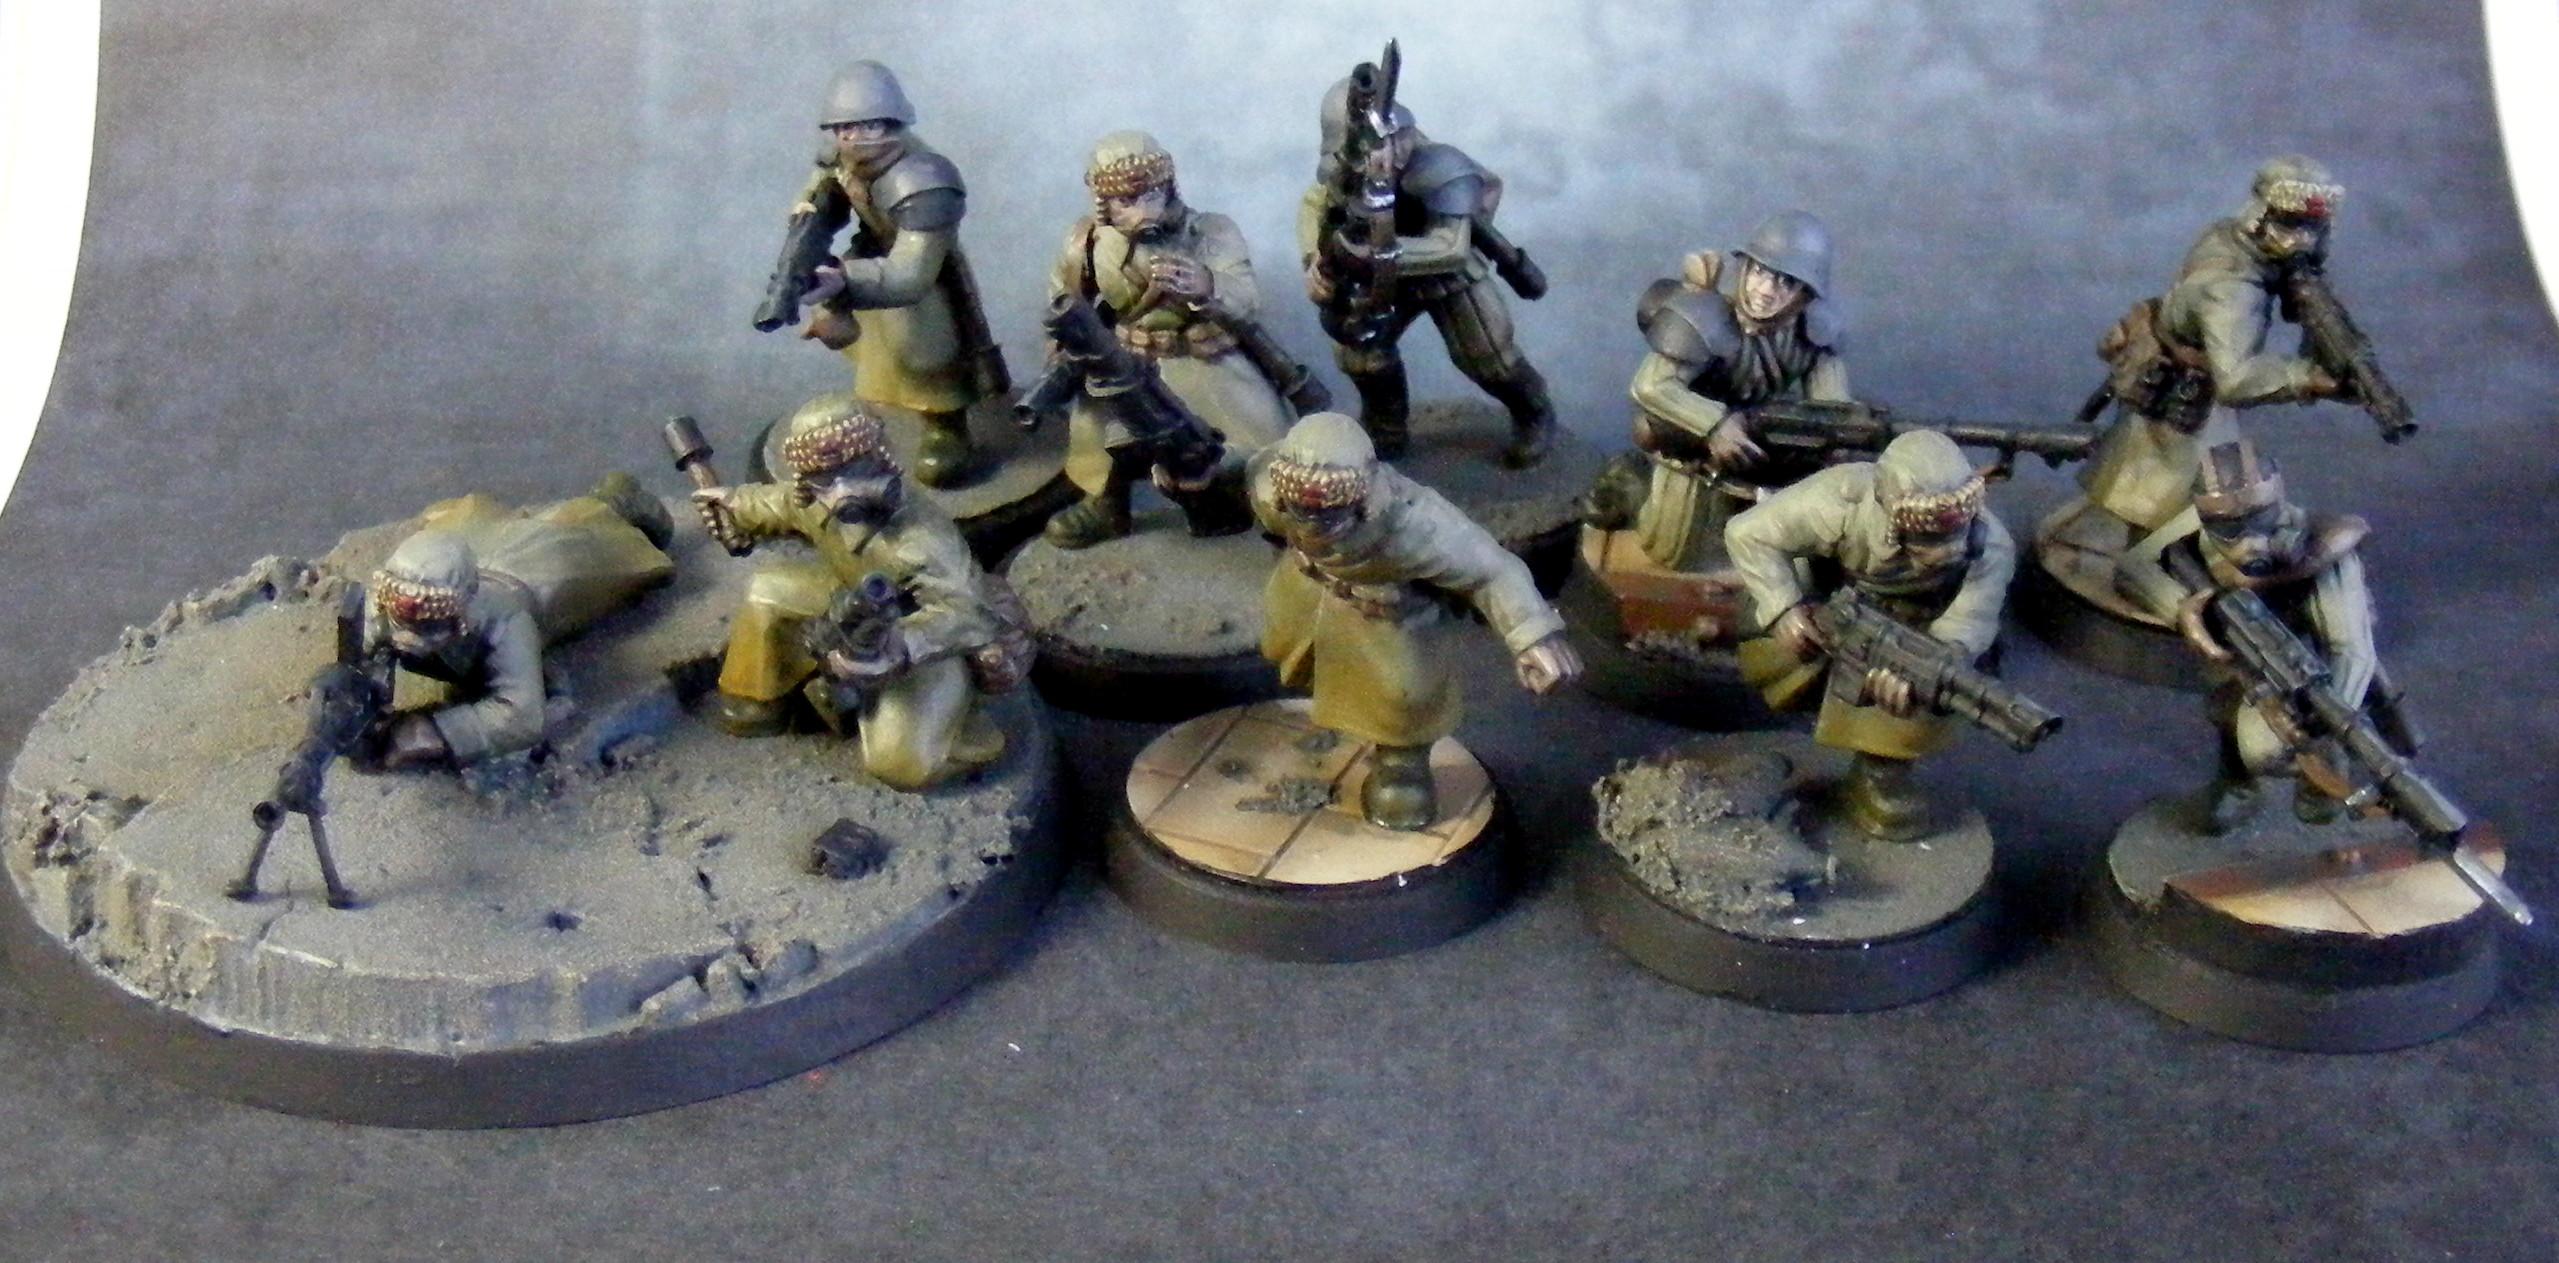 Anvil Industries, Bolt Action, Conversion, Imperial Guard, Victoria Lamb, Warhammer 40,000, Warlord Games